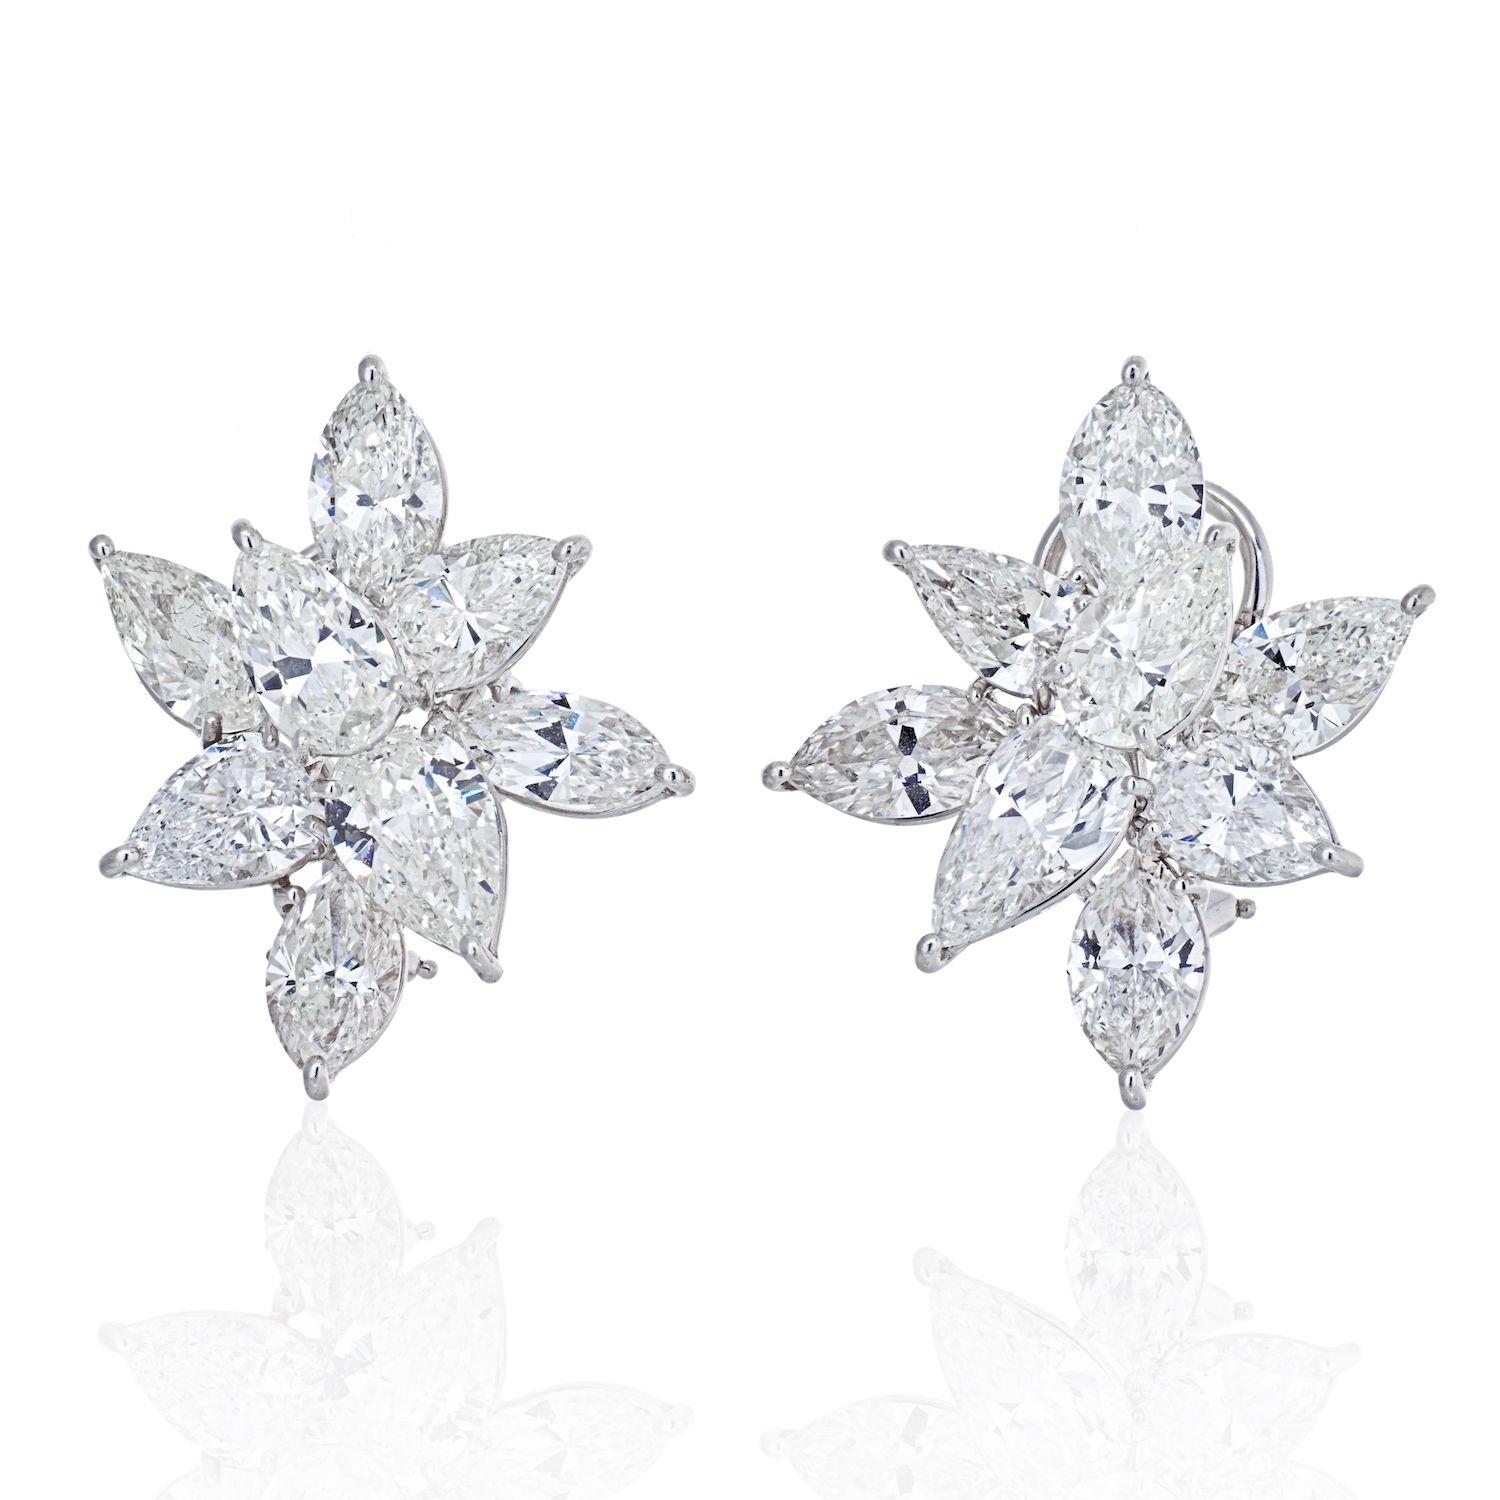 These stunning diamond earrings are exceptional in size, quality and brilliance. Nothing basic about these that's a guarantee! Your ear lobe will be encrusted with large cluster diamonds of a significant size: 6 Marquise cuts totaling 6.53cts and 10